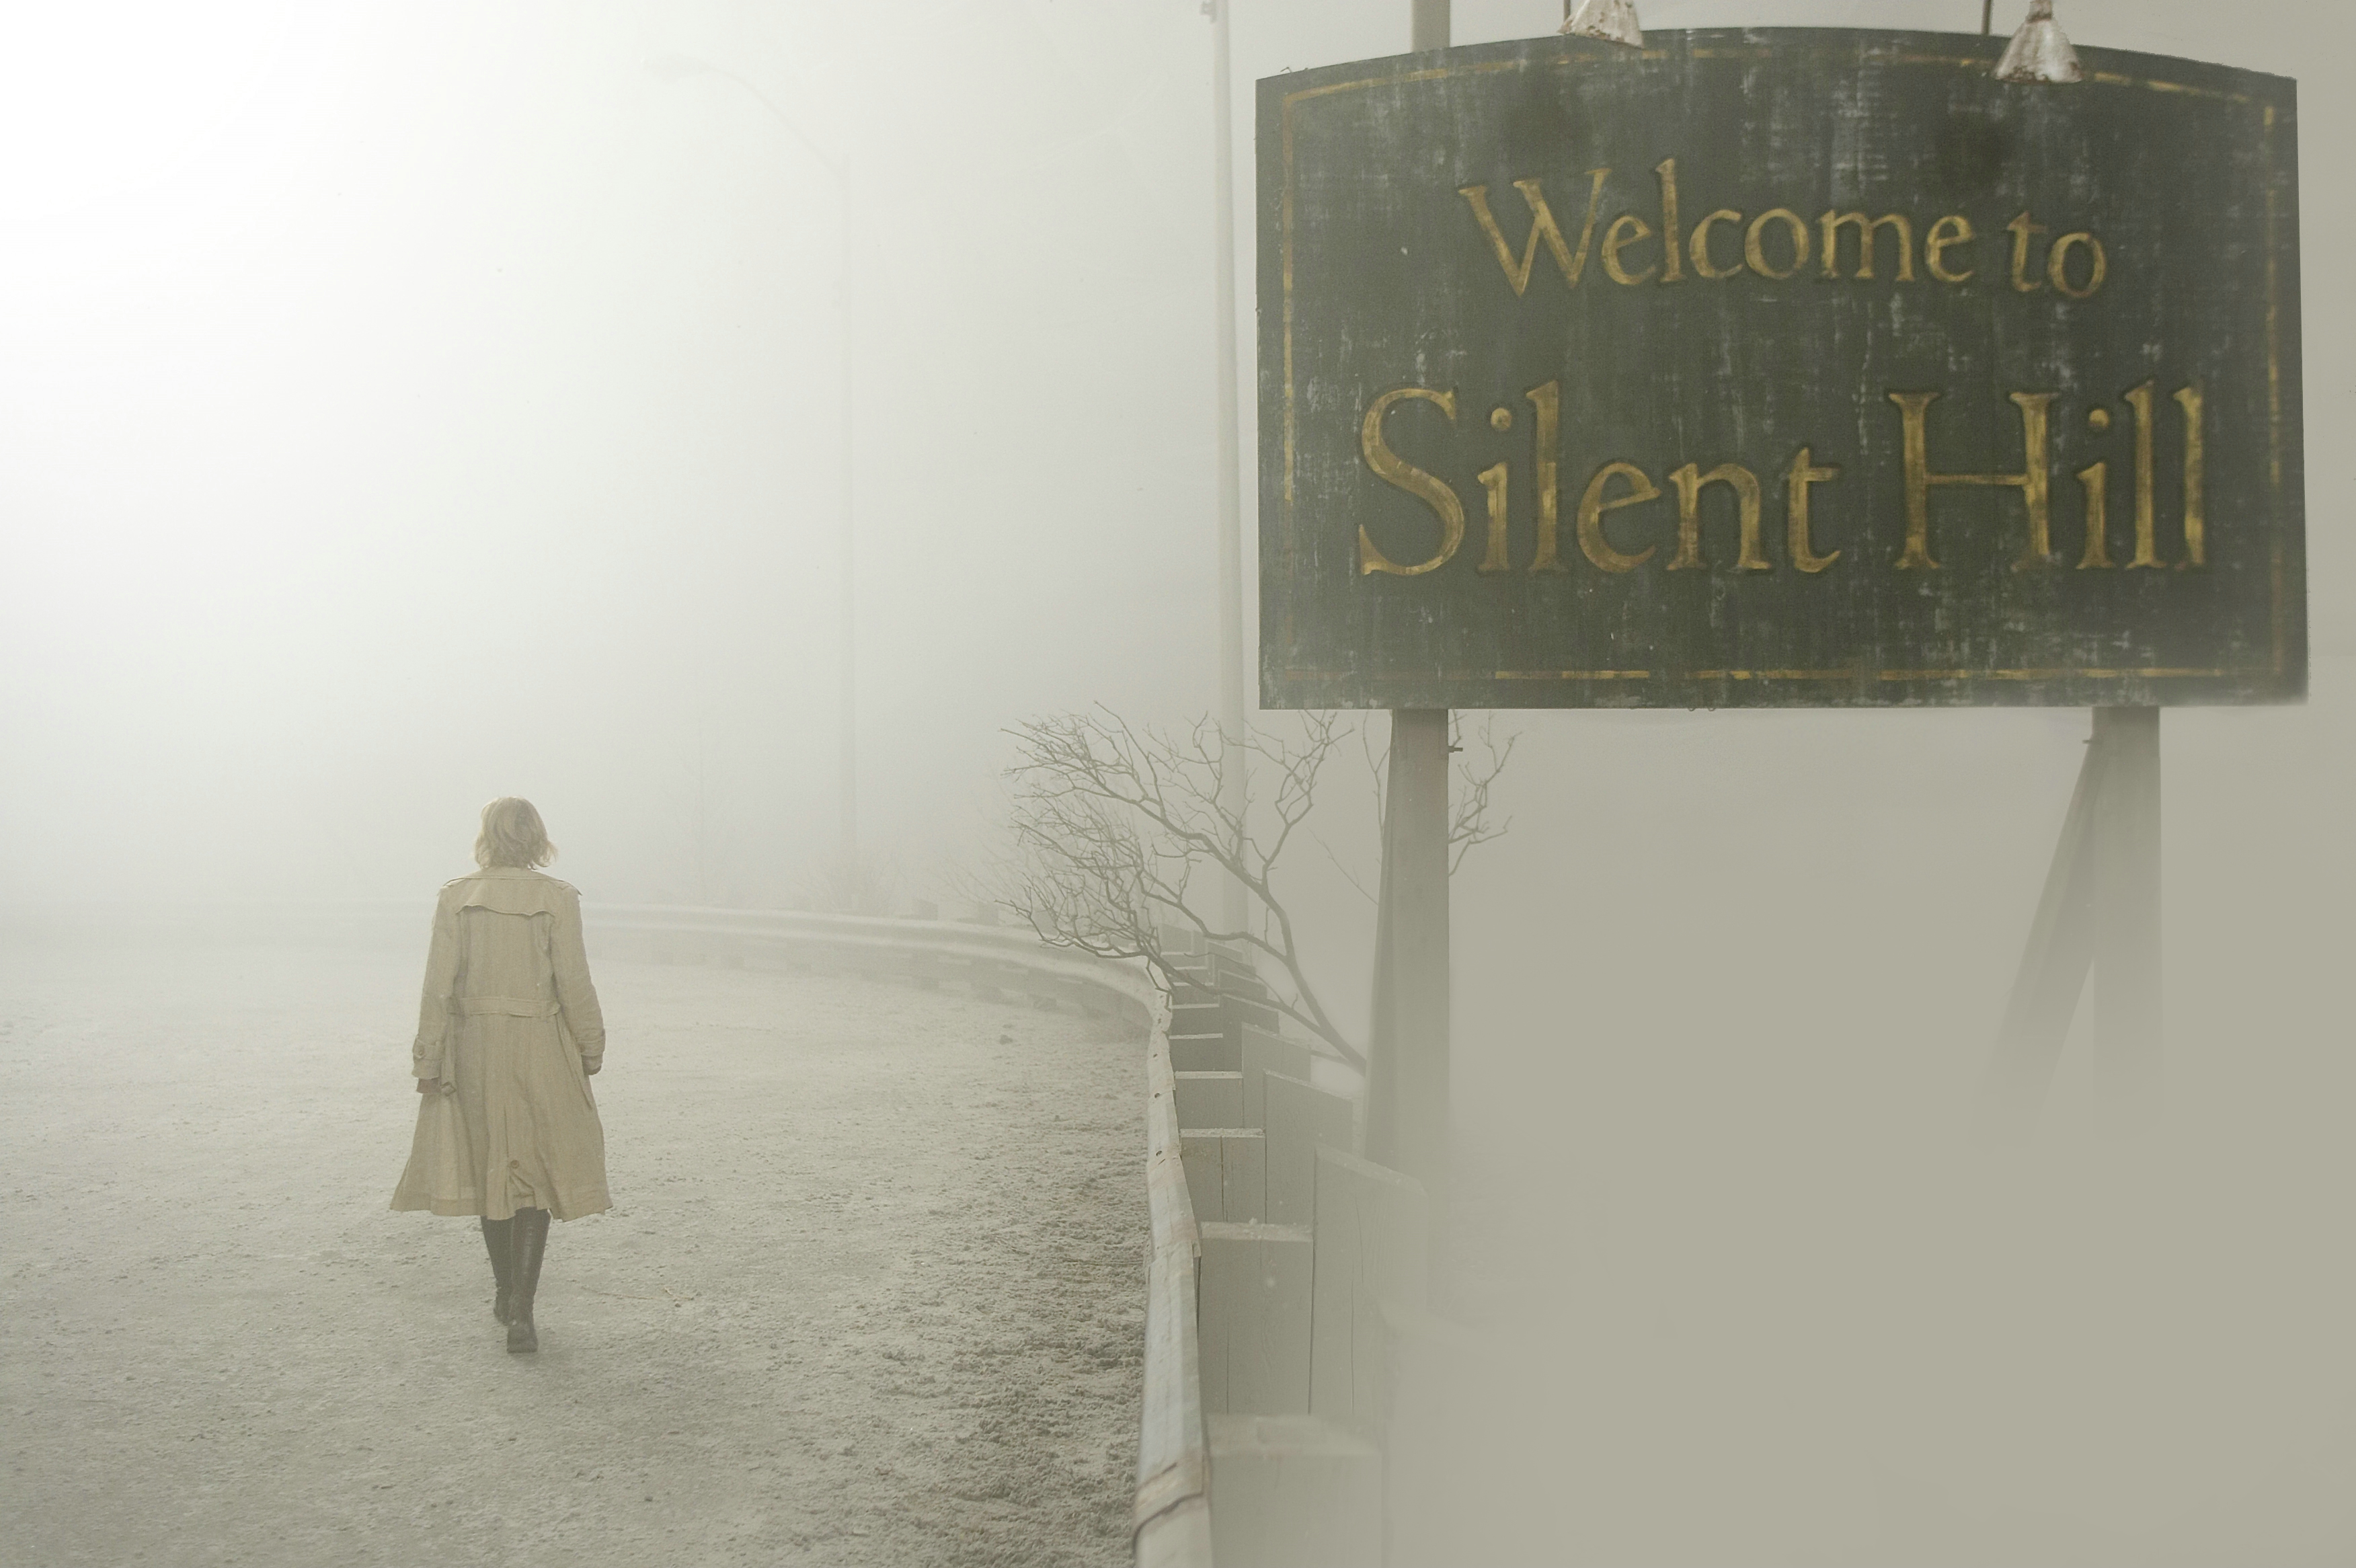 Silent Hill 2 Remake Officially Announced At Last - Gameranx